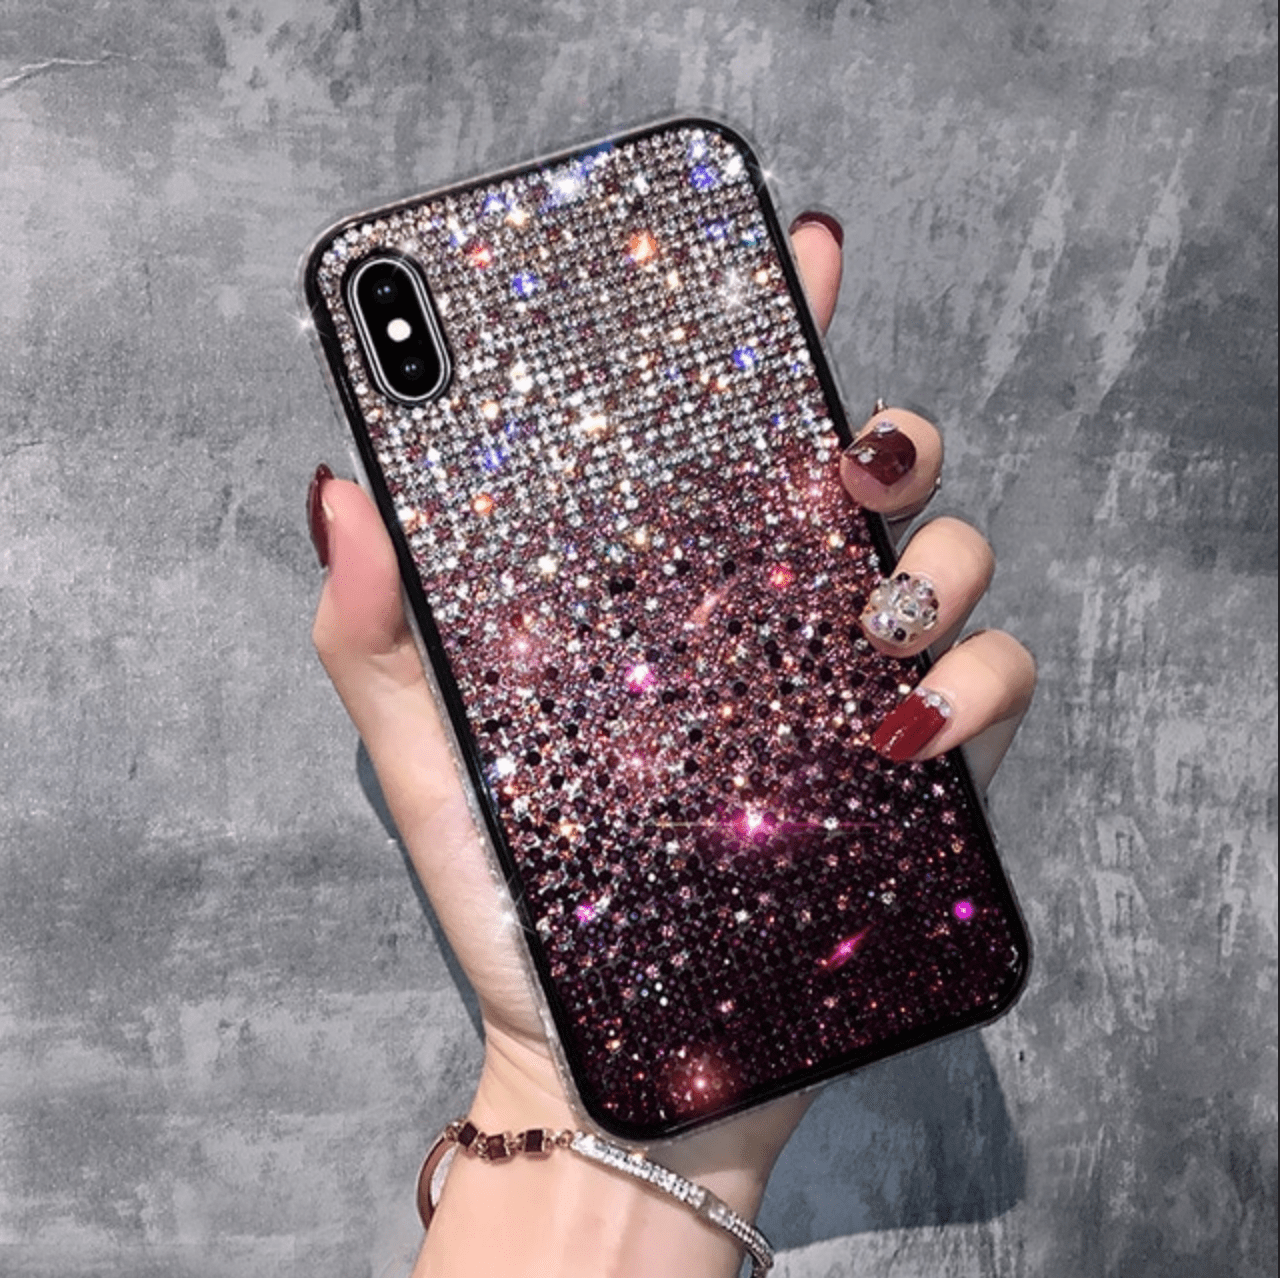 Colorful Glitter cases for Iphone users